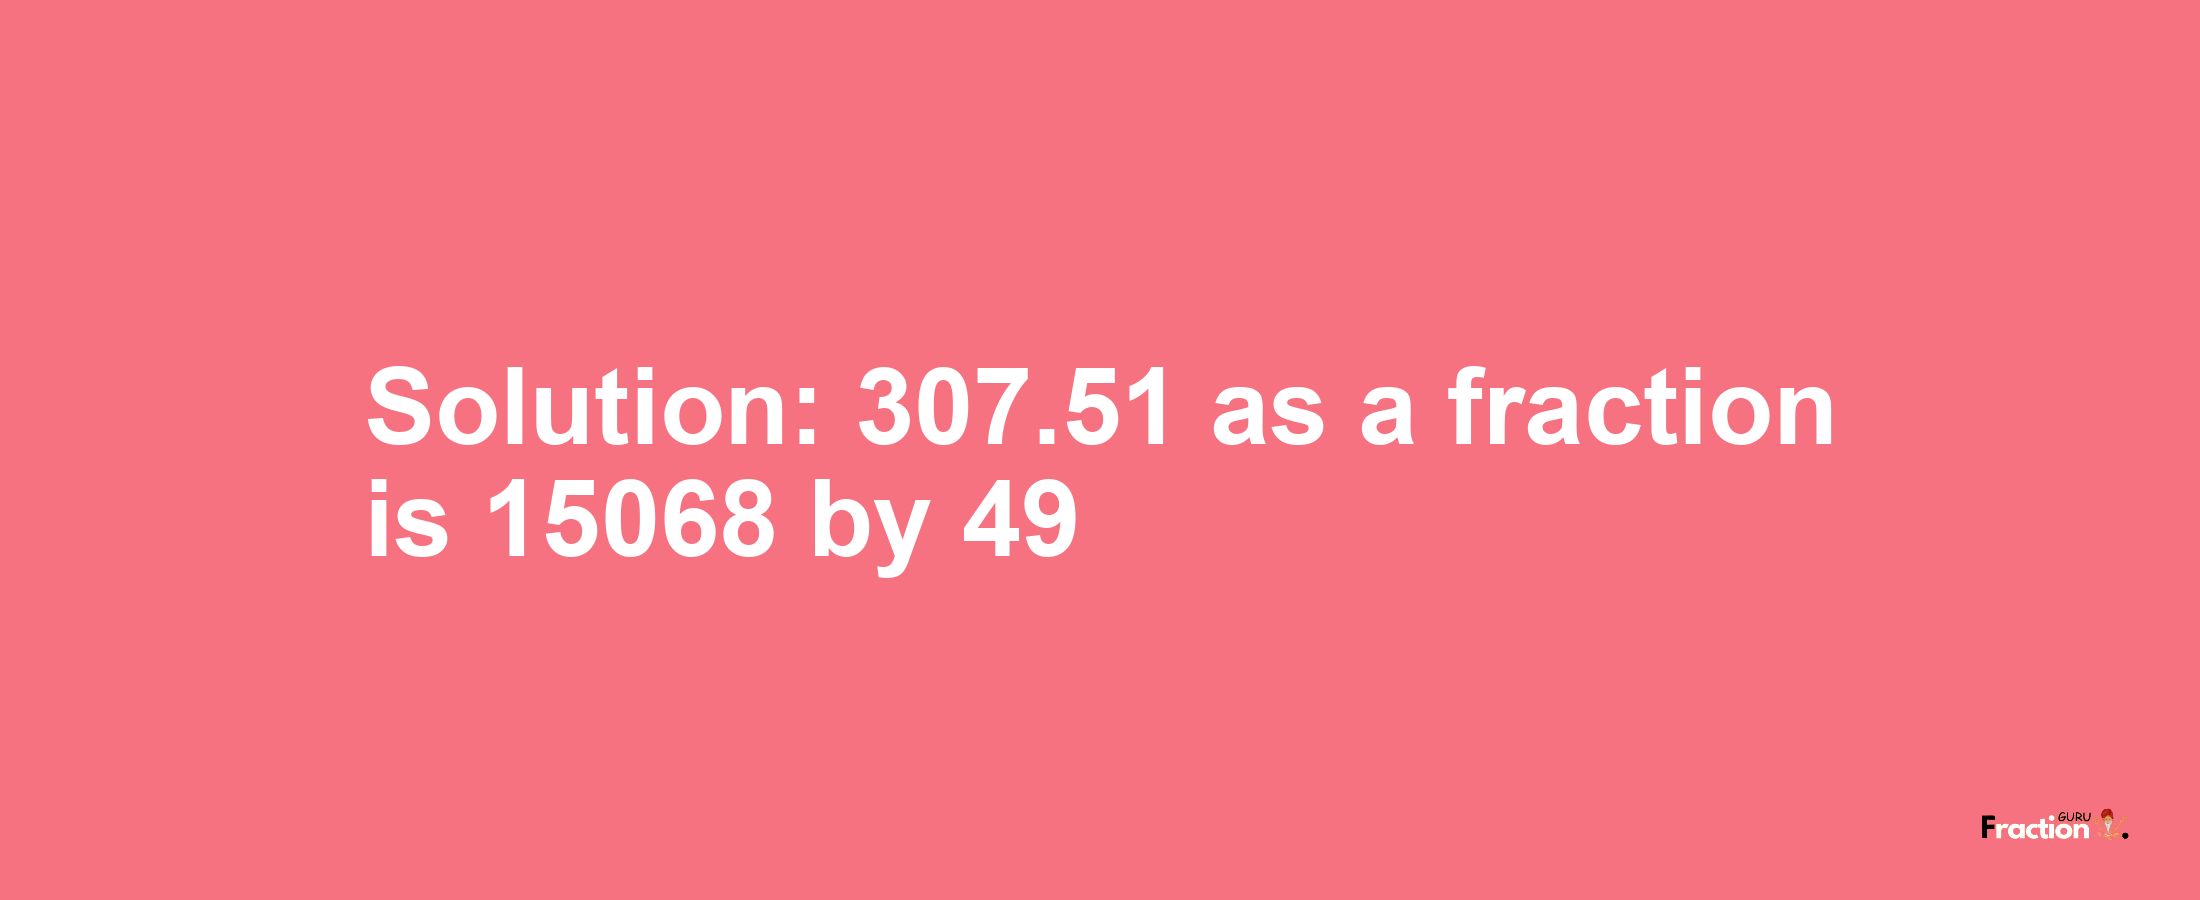 Solution:307.51 as a fraction is 15068/49